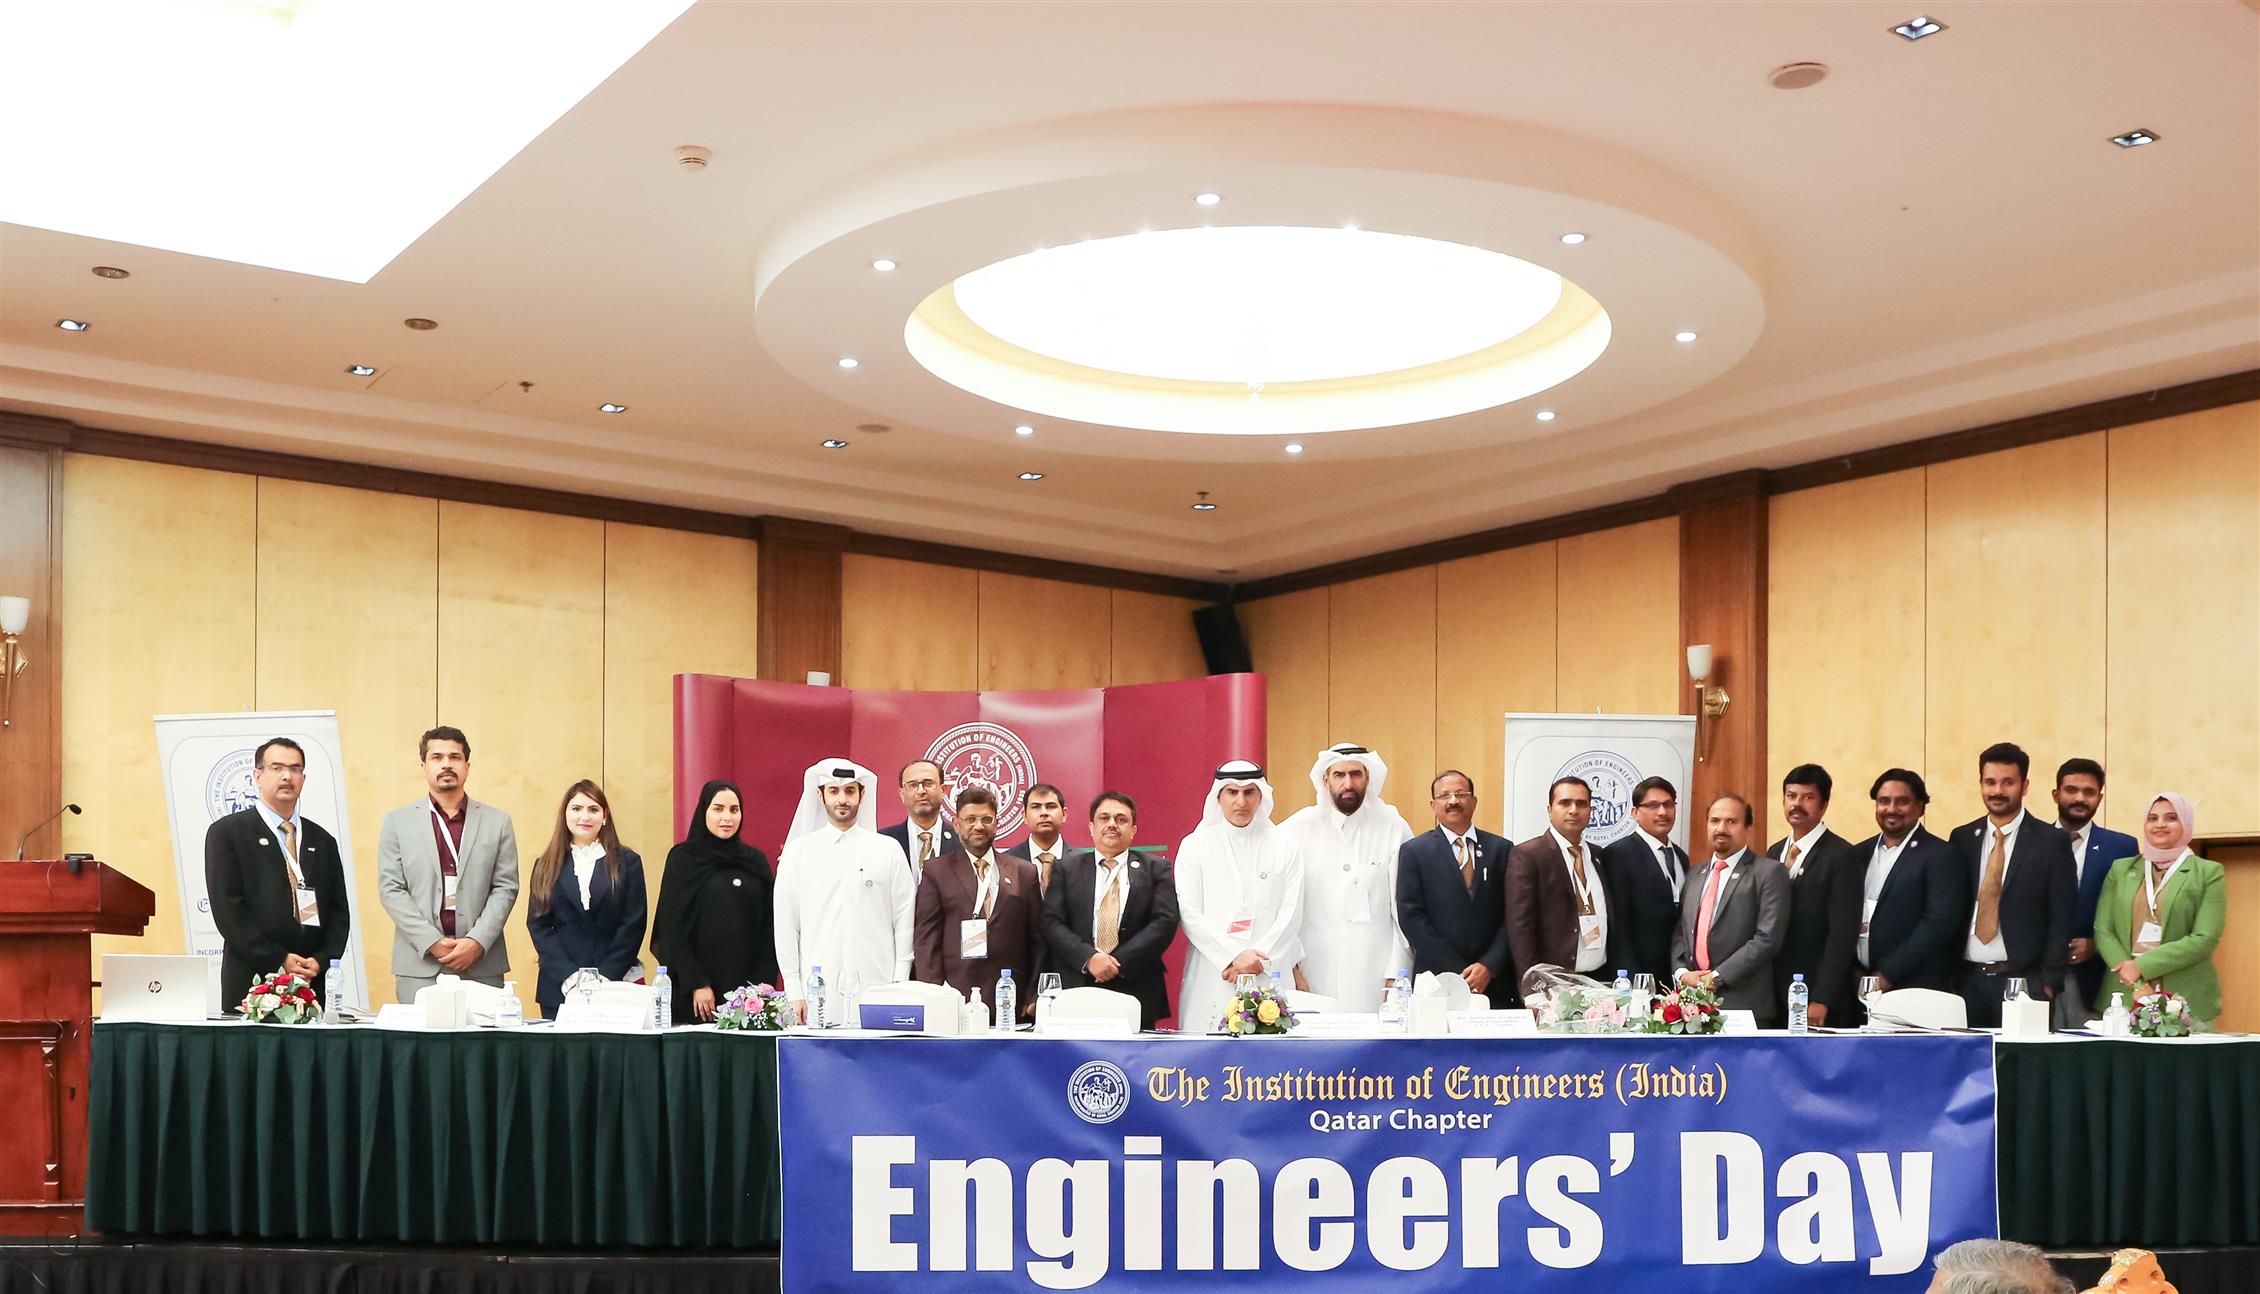 55th Engineers Day on 30 September 2022 at RADISSON BLU HOTEL DOHA